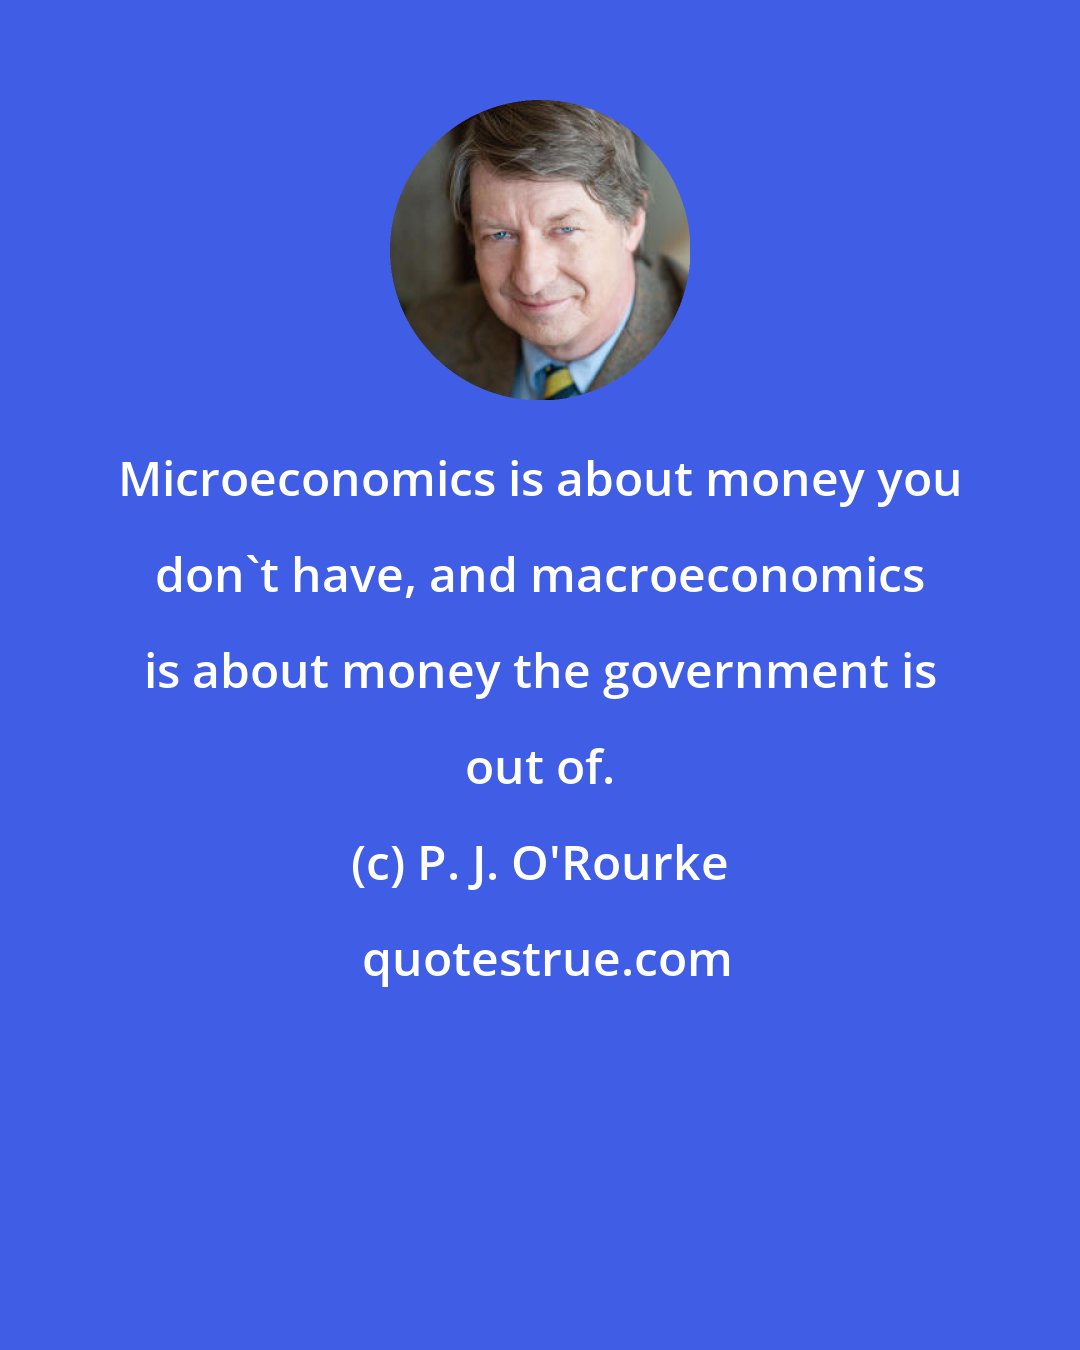 P. J. O'Rourke: Microeconomics is about money you don't have, and macroeconomics is about money the government is out of.